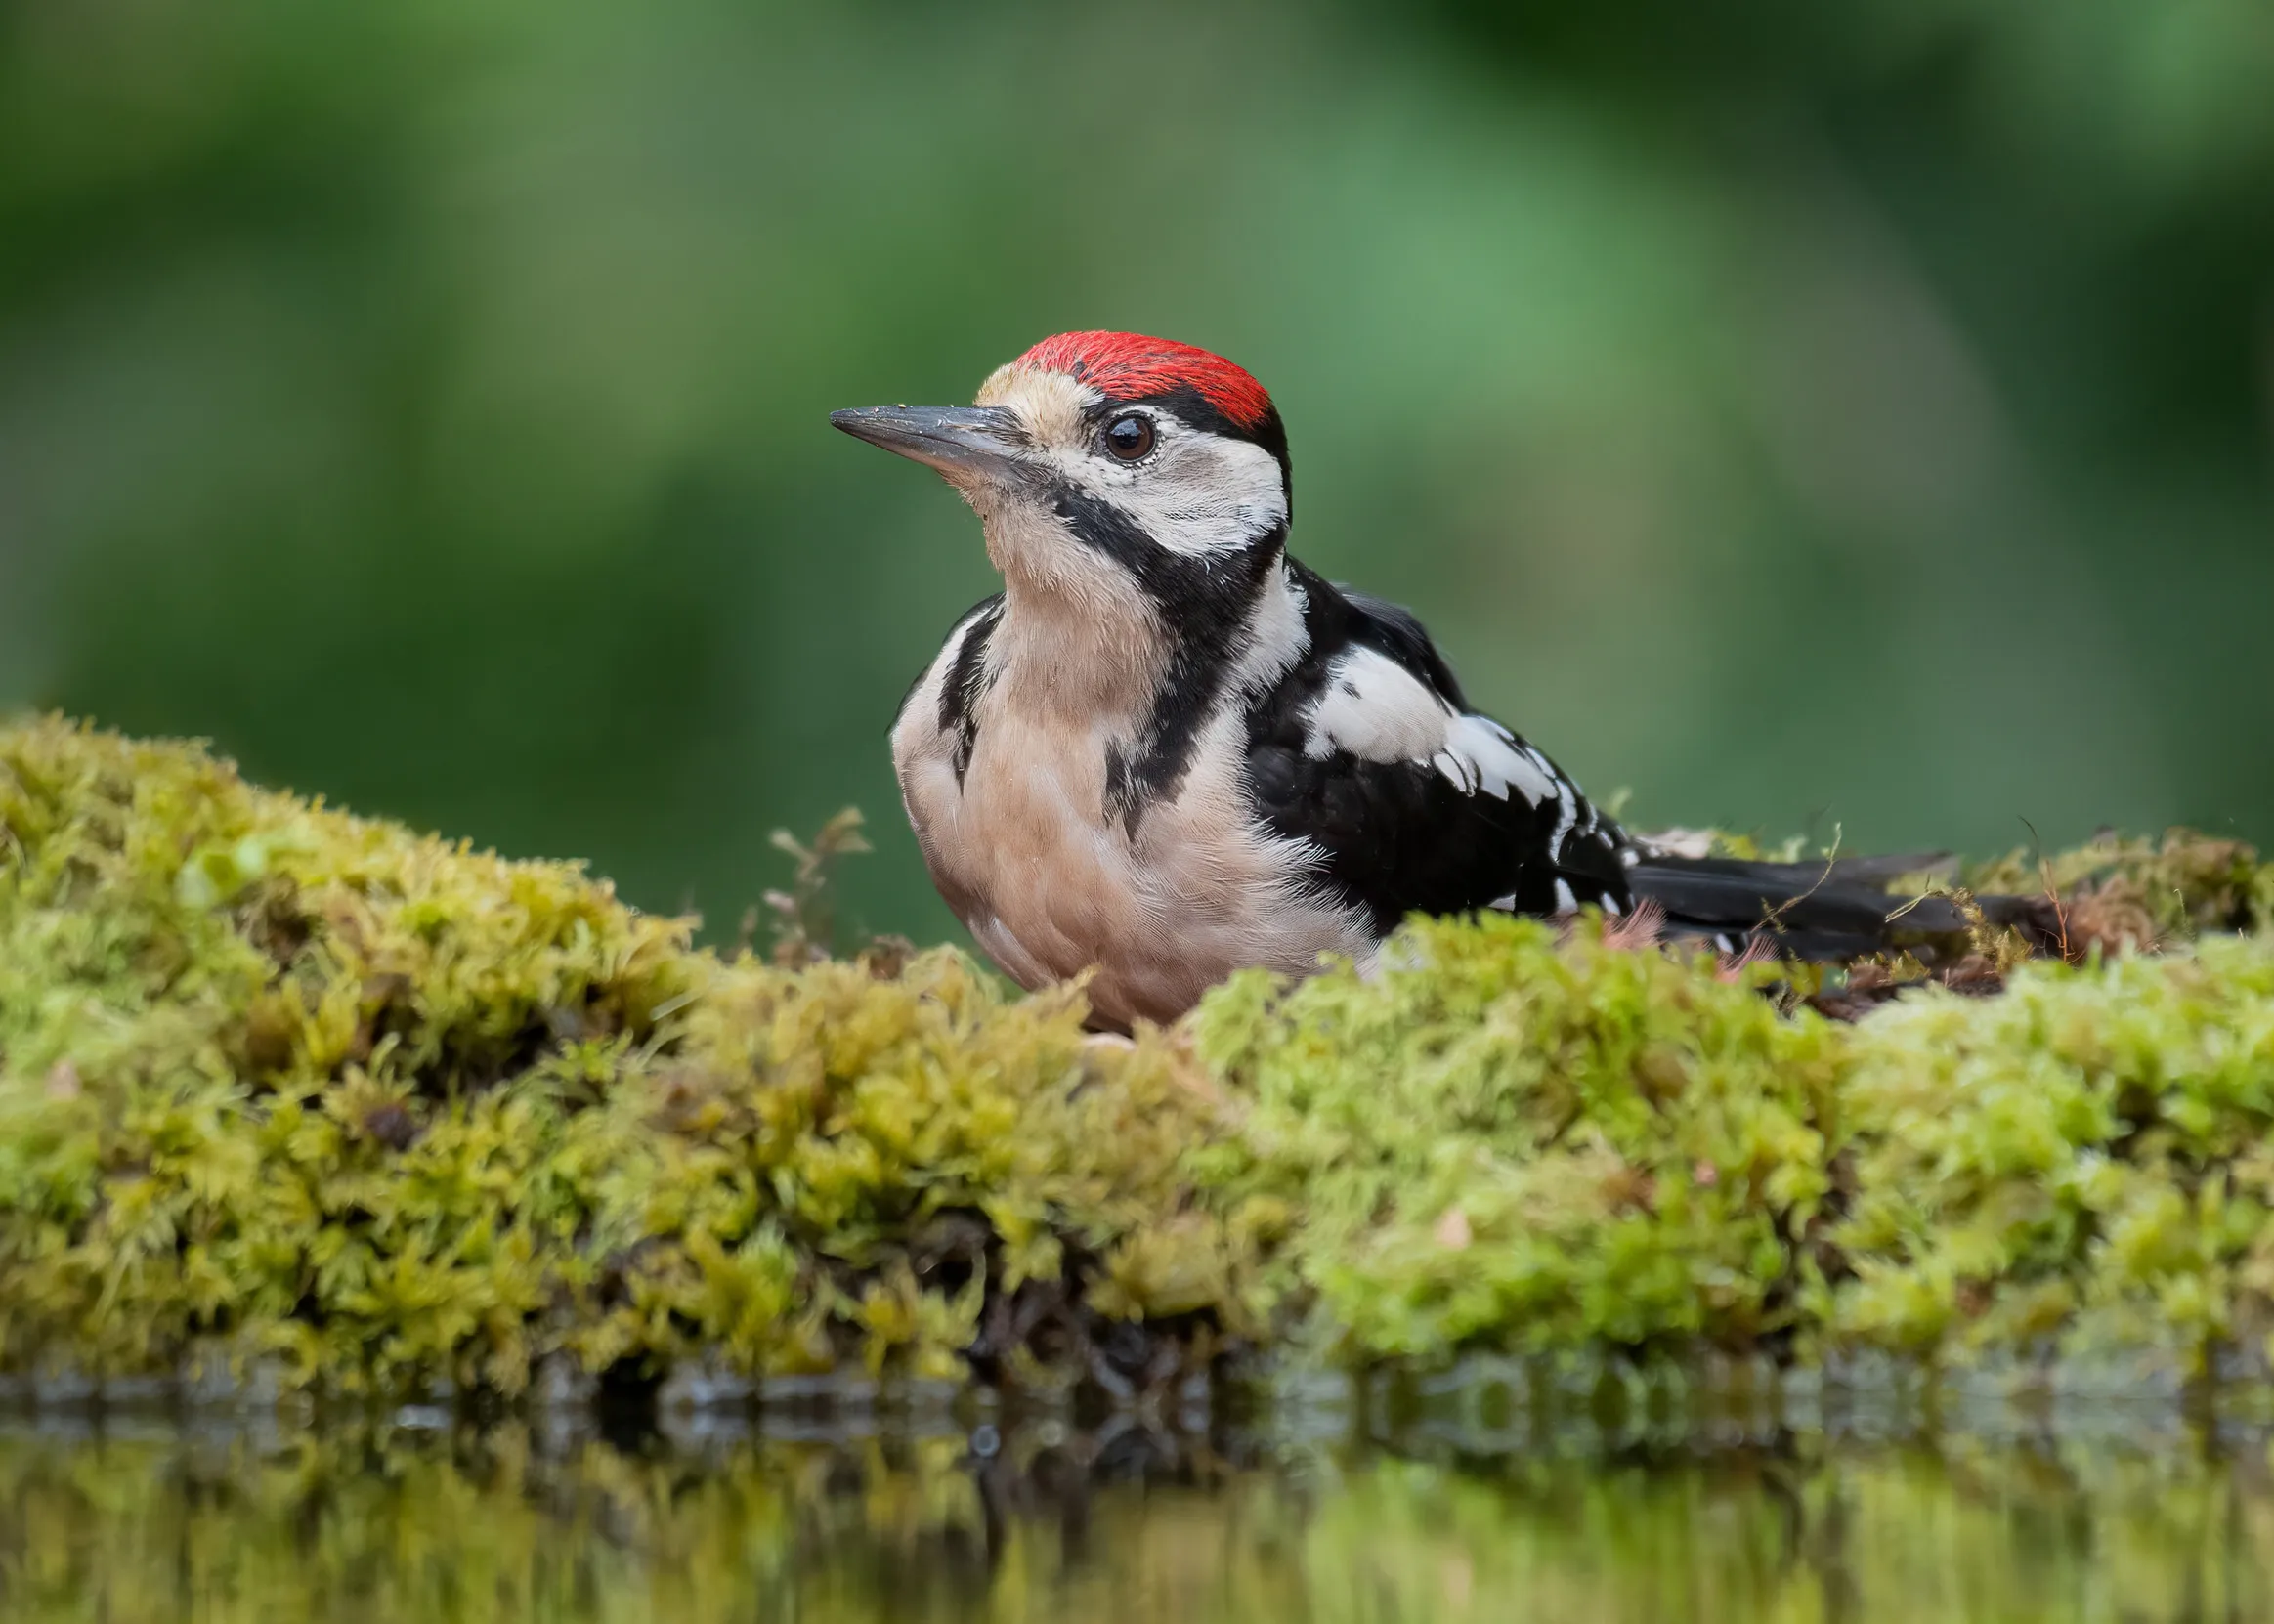 Juvenile Great Spotted Woodpecker, sat on a mossy bank beside a pool of water